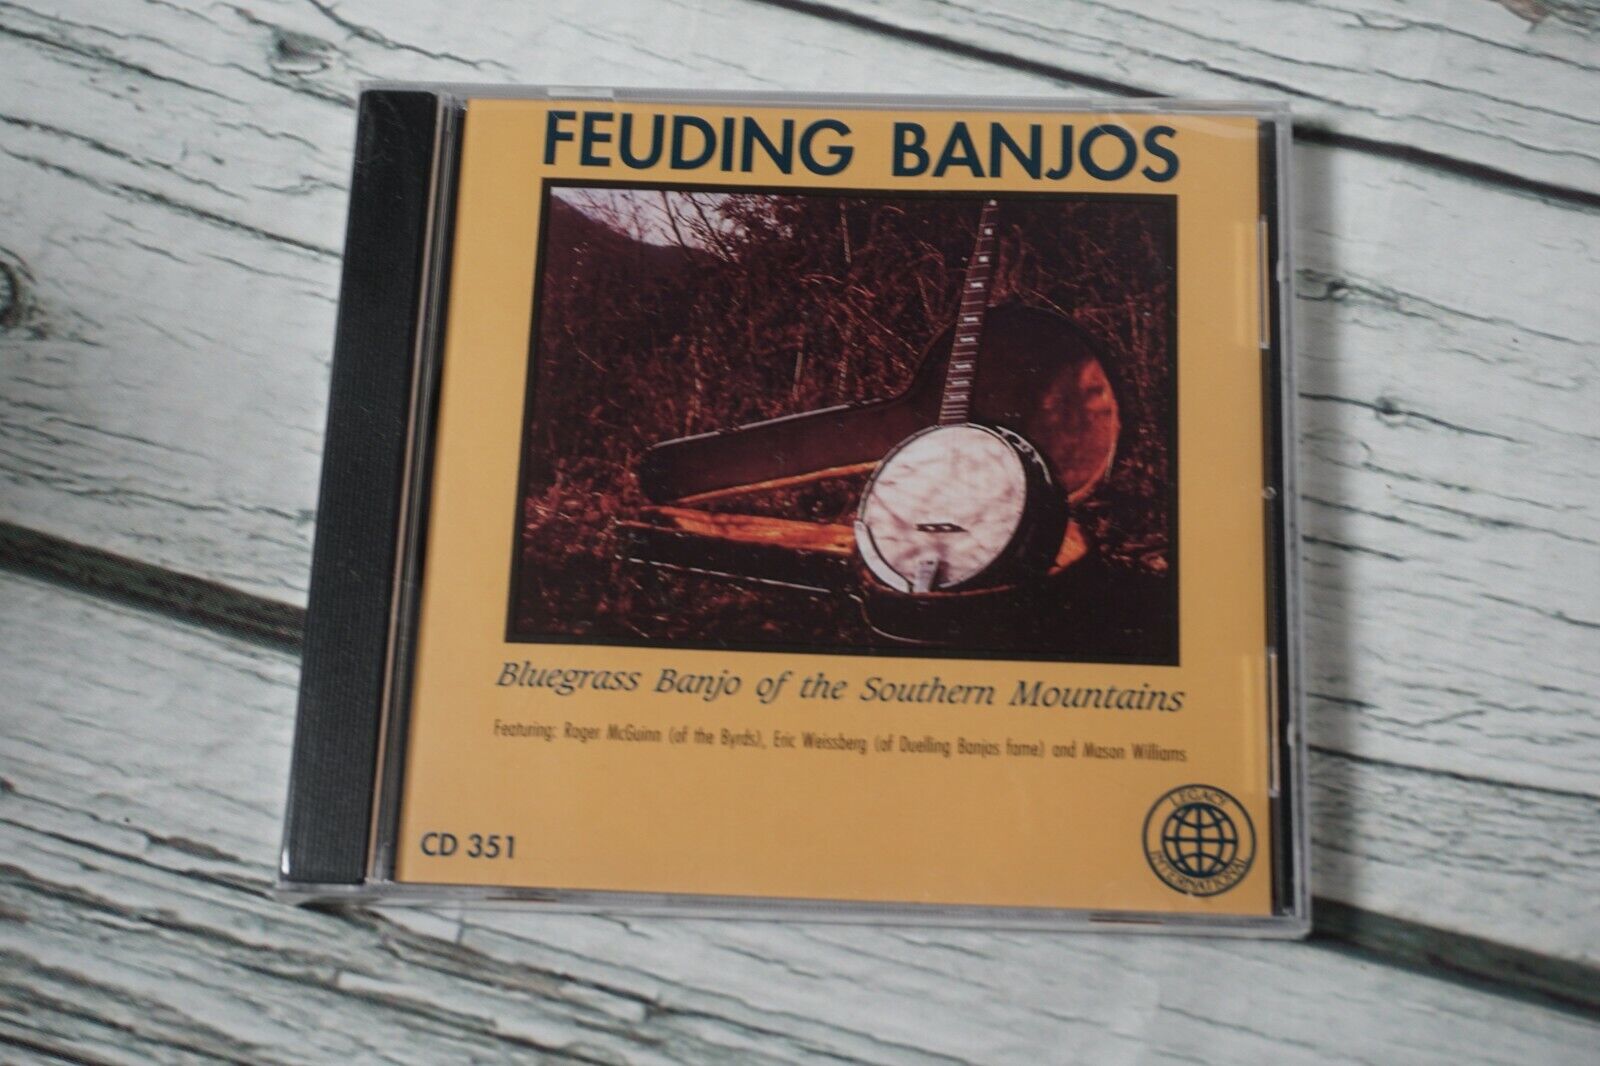 Feuding Banjos: Bluegrass Banjo of the Southern Mountains Audio Music CD